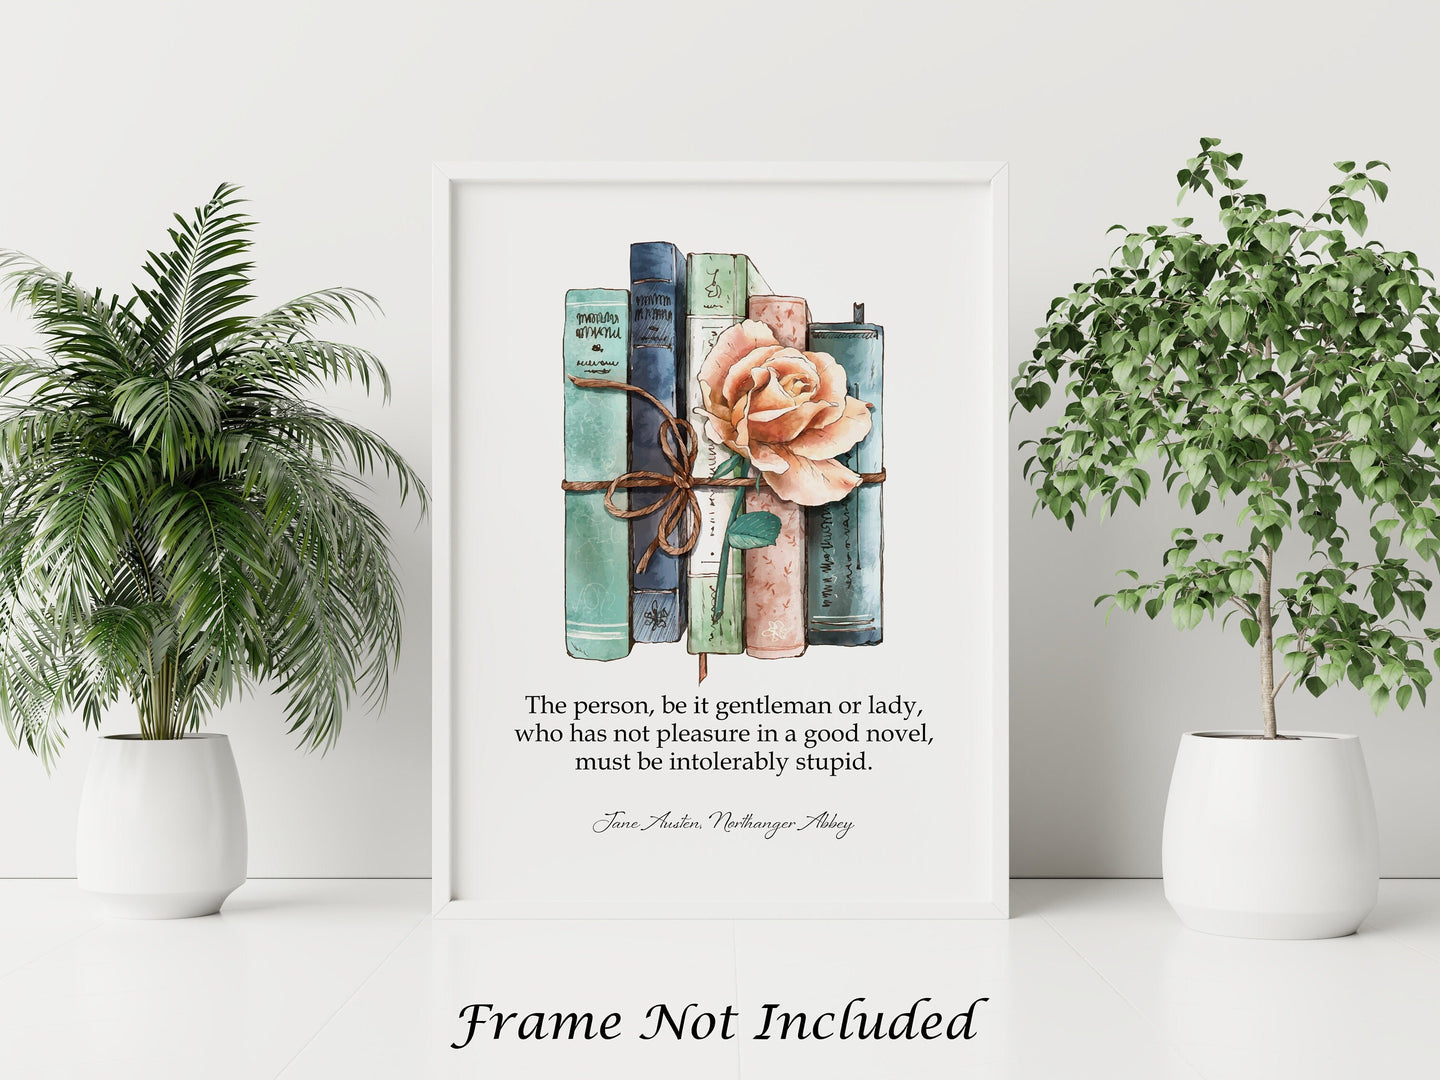 Jane Austen Book Quote Poster print from Northanger Abbey - The person, be it gentleman or lady, who has not pleasure... Book Lover Gift